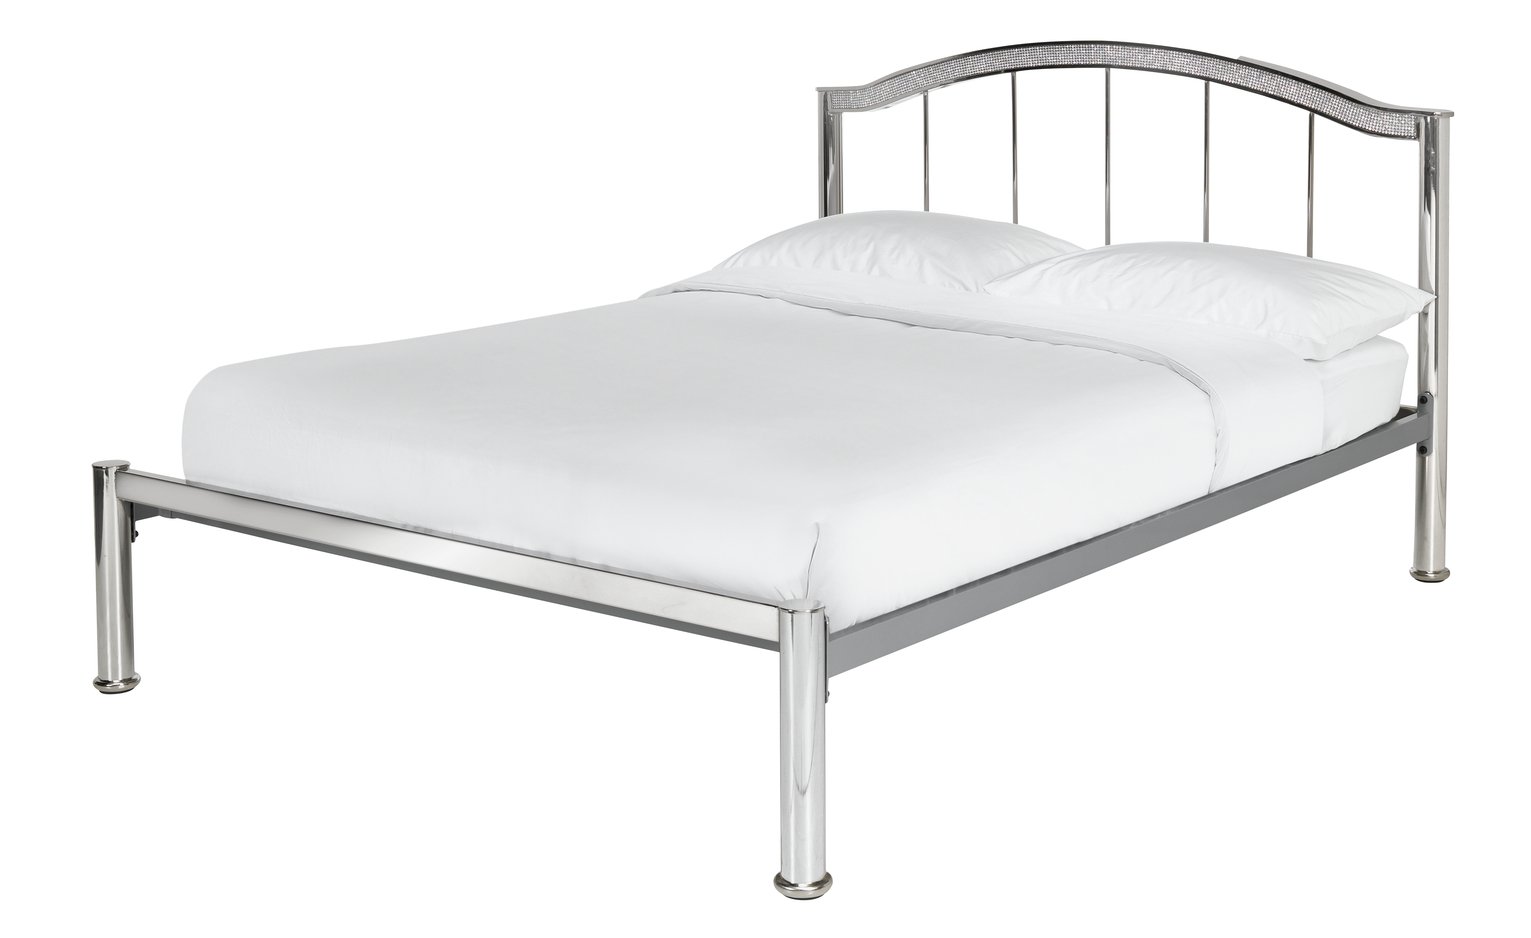 Argos Home Sparkle Double Bed Frame review